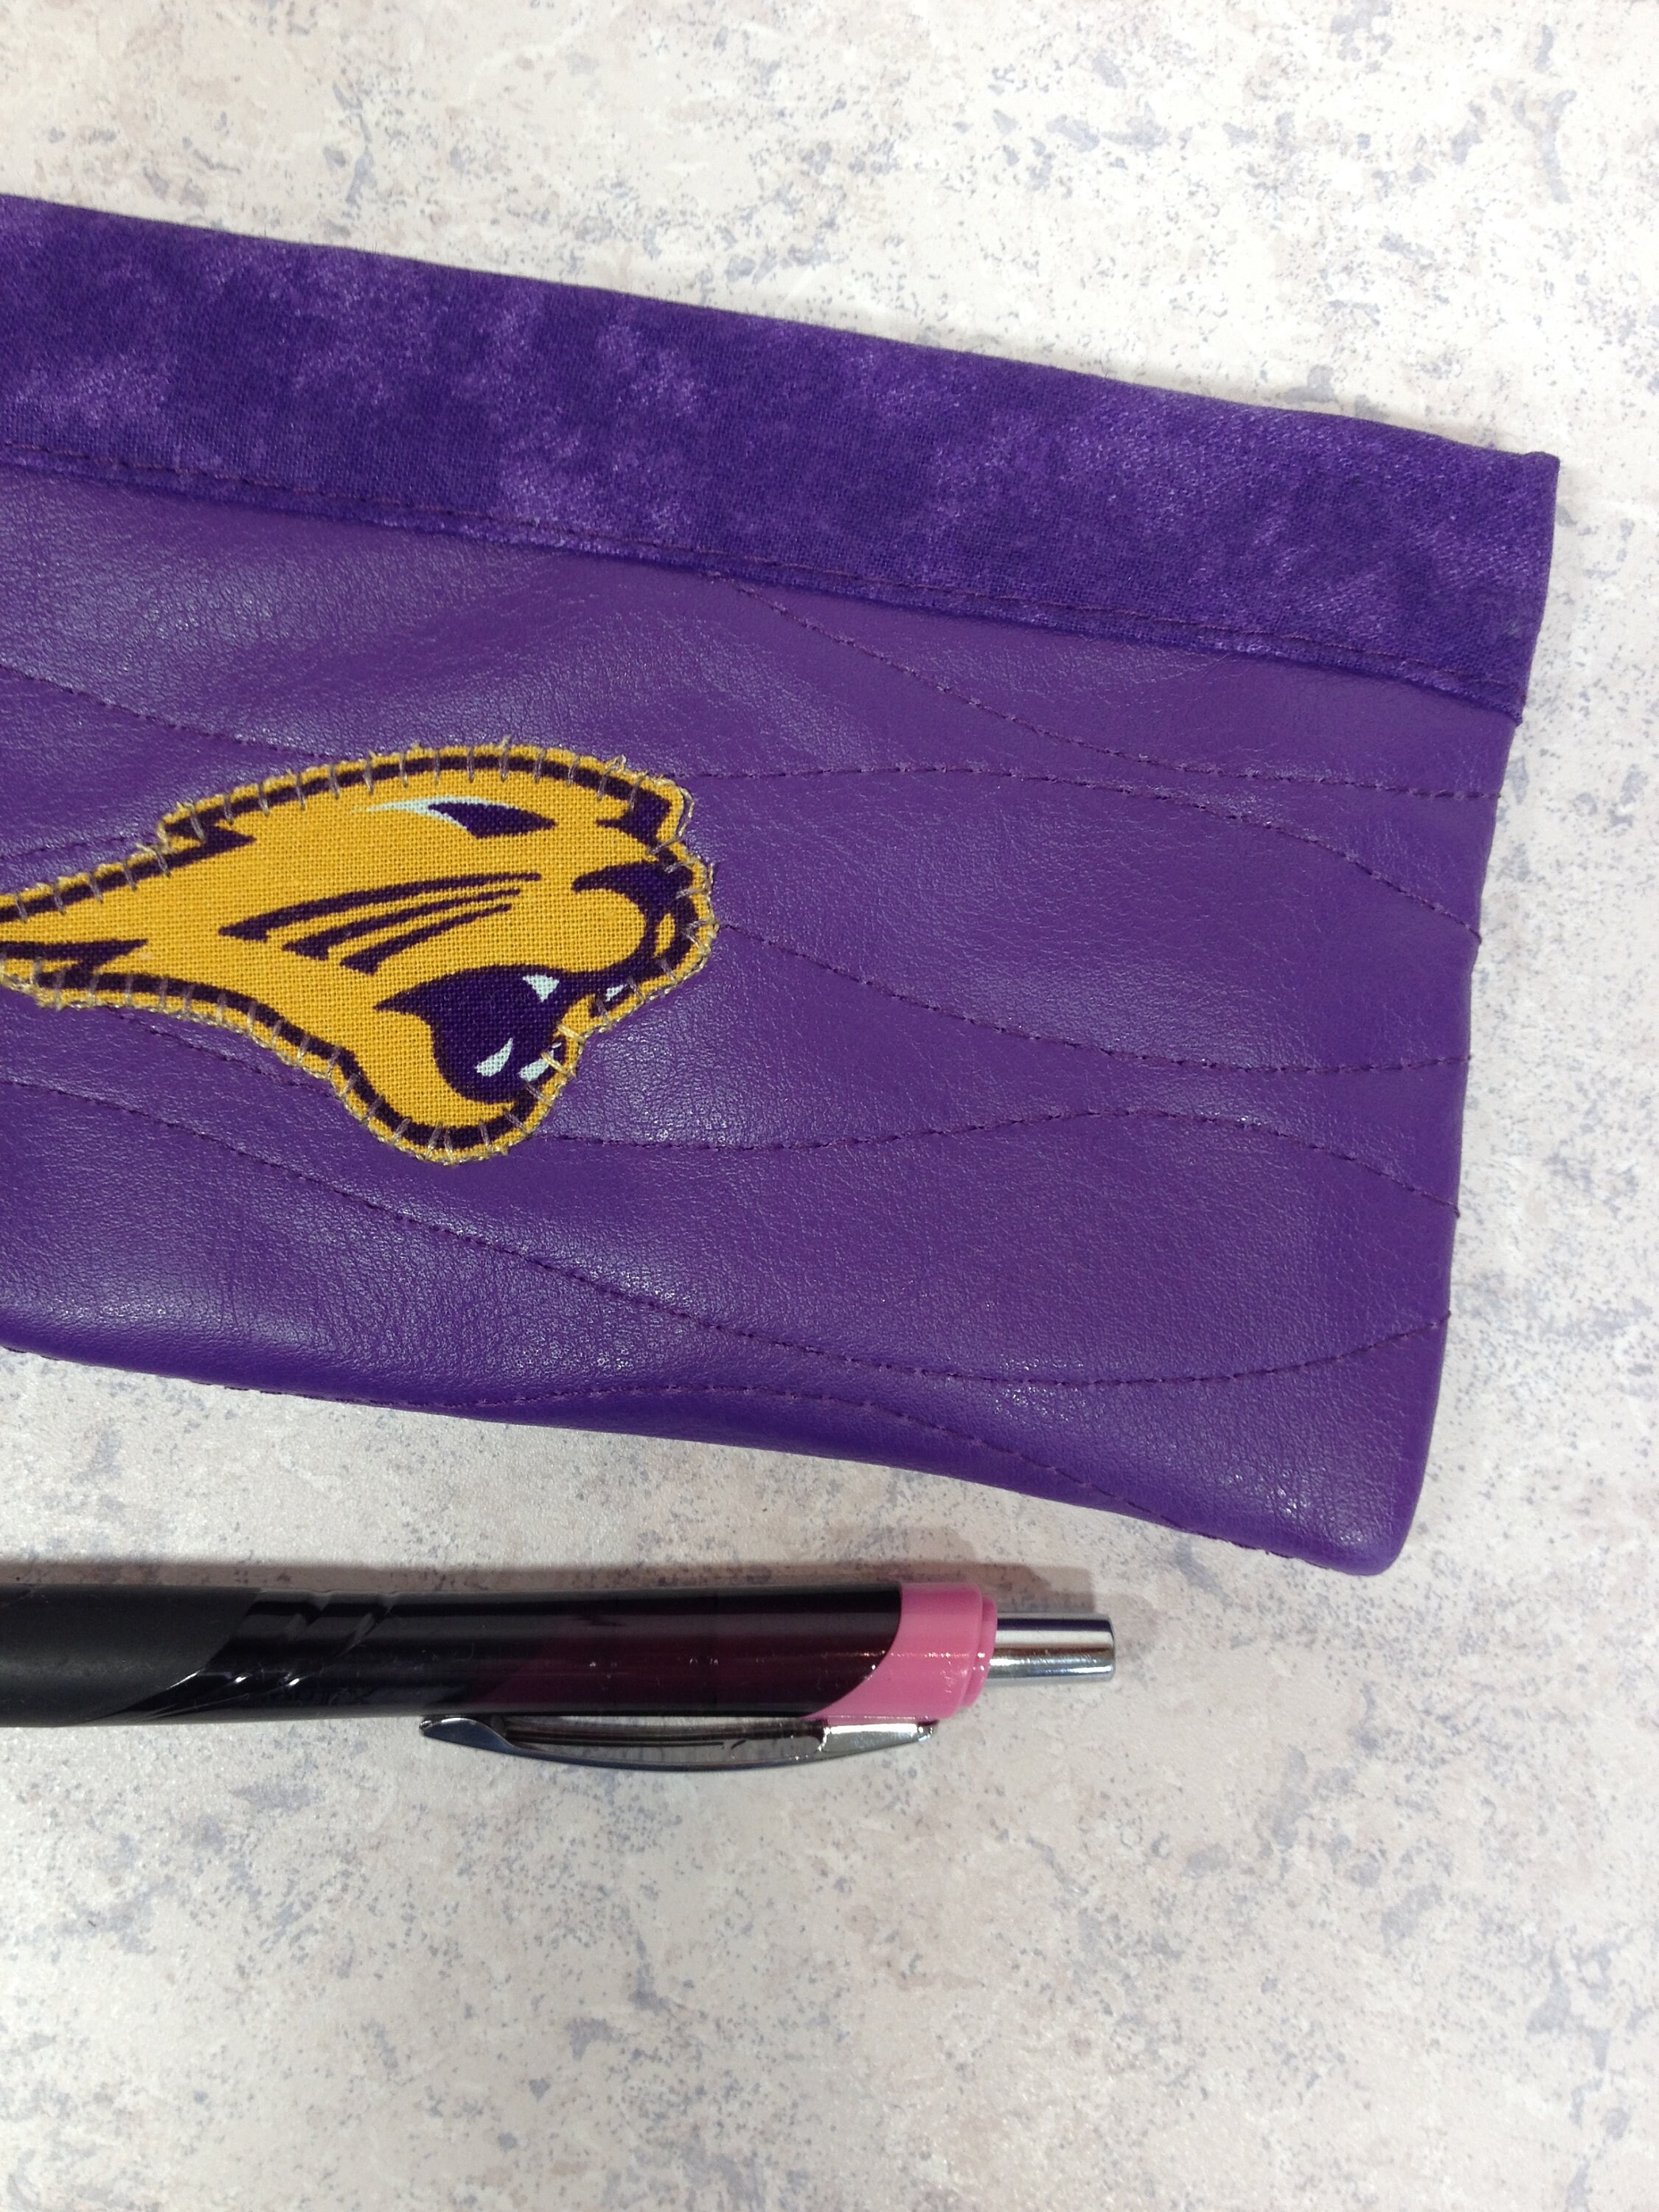 UNI Panthers faux leather Pencil pouch University of Northern | Etsy